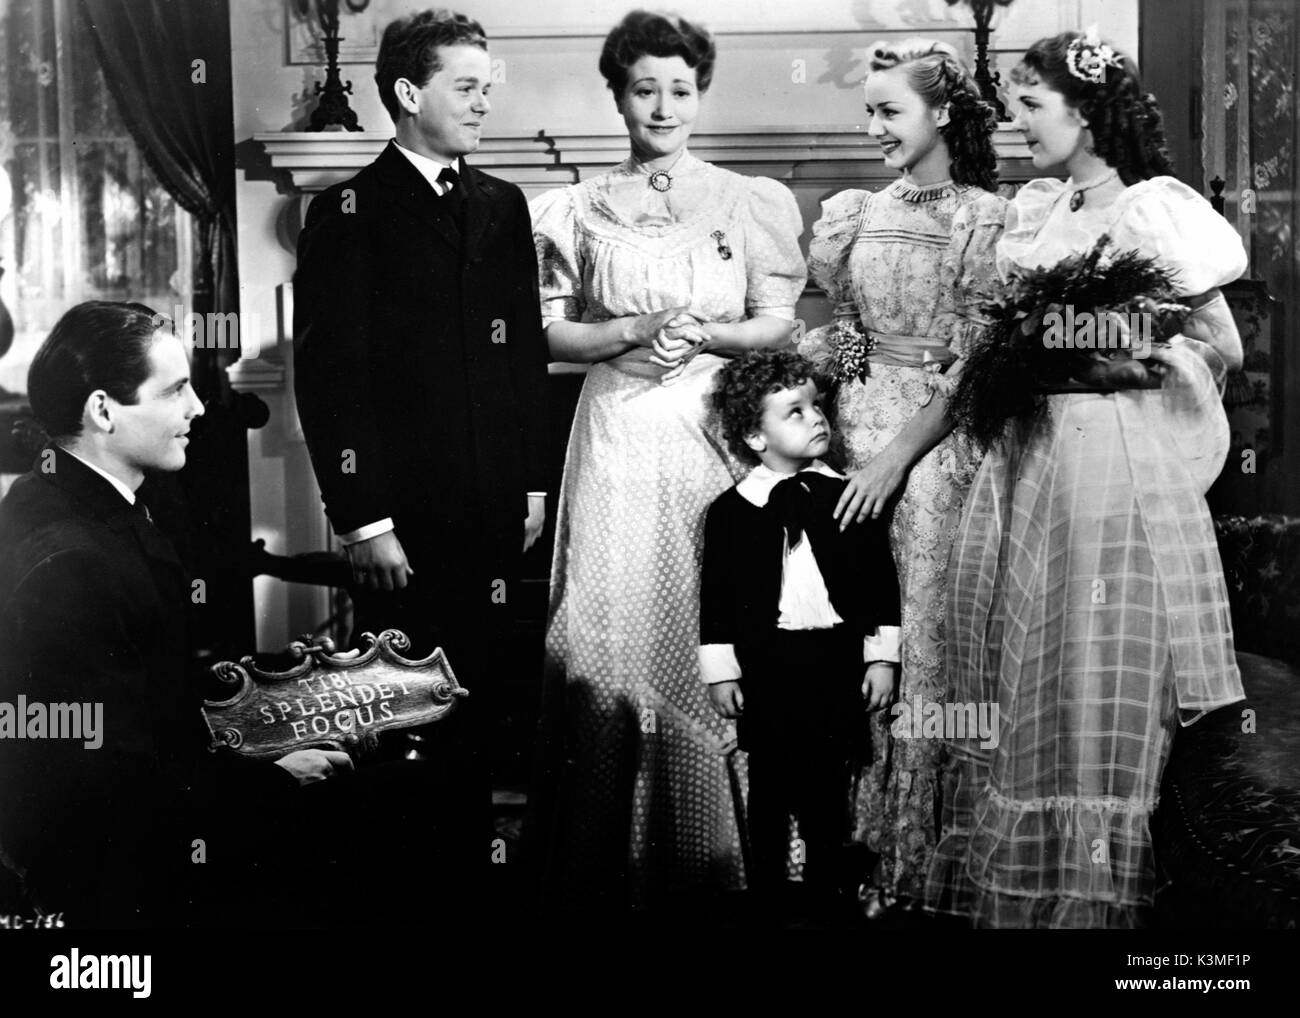 MOTHER CAREY'S CHICKENS [US 1938] [L-R] JAMES ELLISON, JACKIE MORAN, FAY BAINTER, ANNE SHIRLEY, RUBY KEELER, DONNIE DUNAGAN [child actor]     Date: 1938 Stock Photo